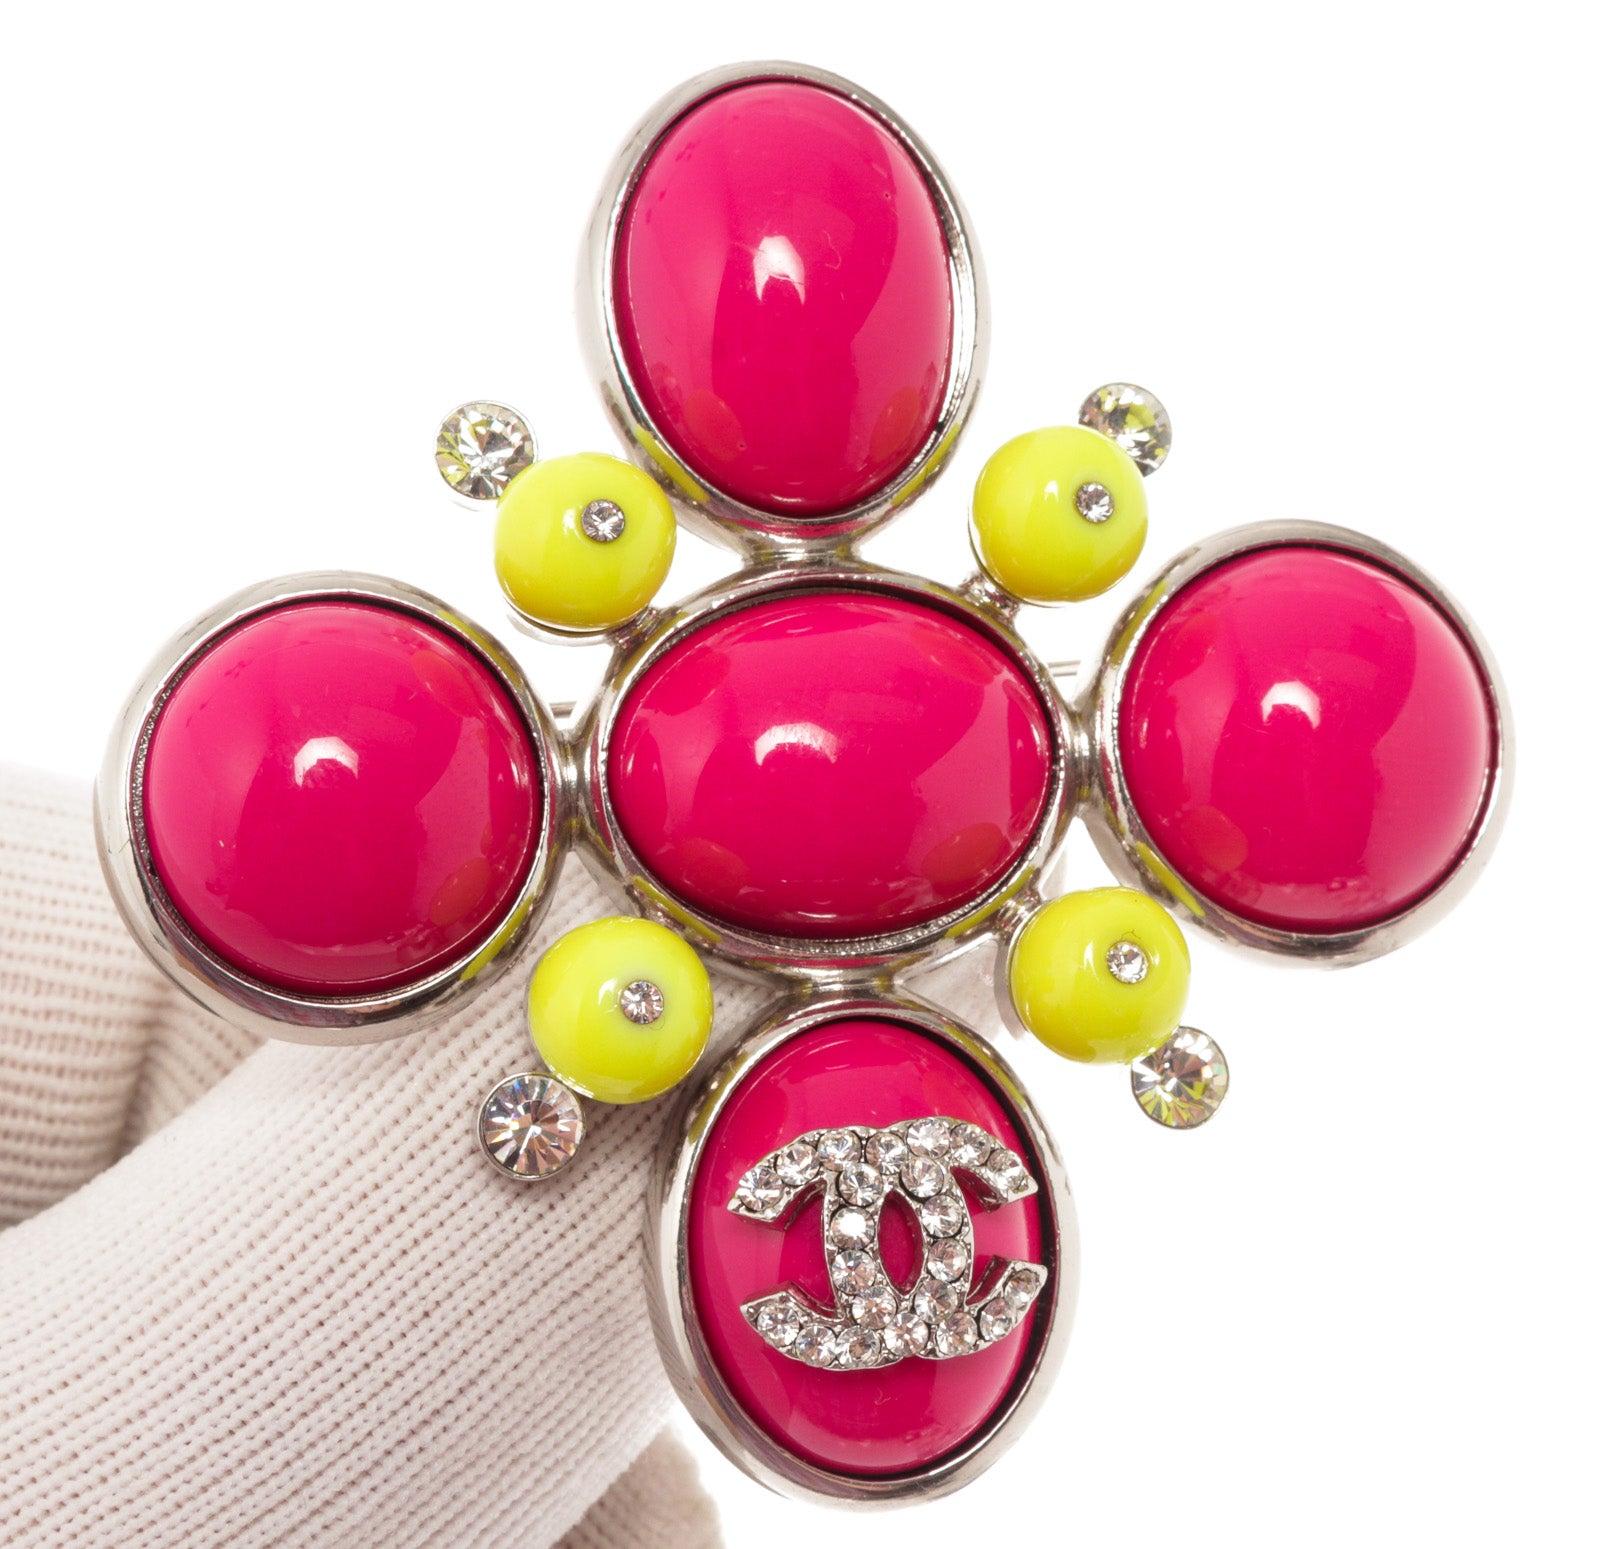 Chanel cluster brooch with resin and crystal ornaments in pink and yellow, with CC logo, silver-tone hardware


58229MSC